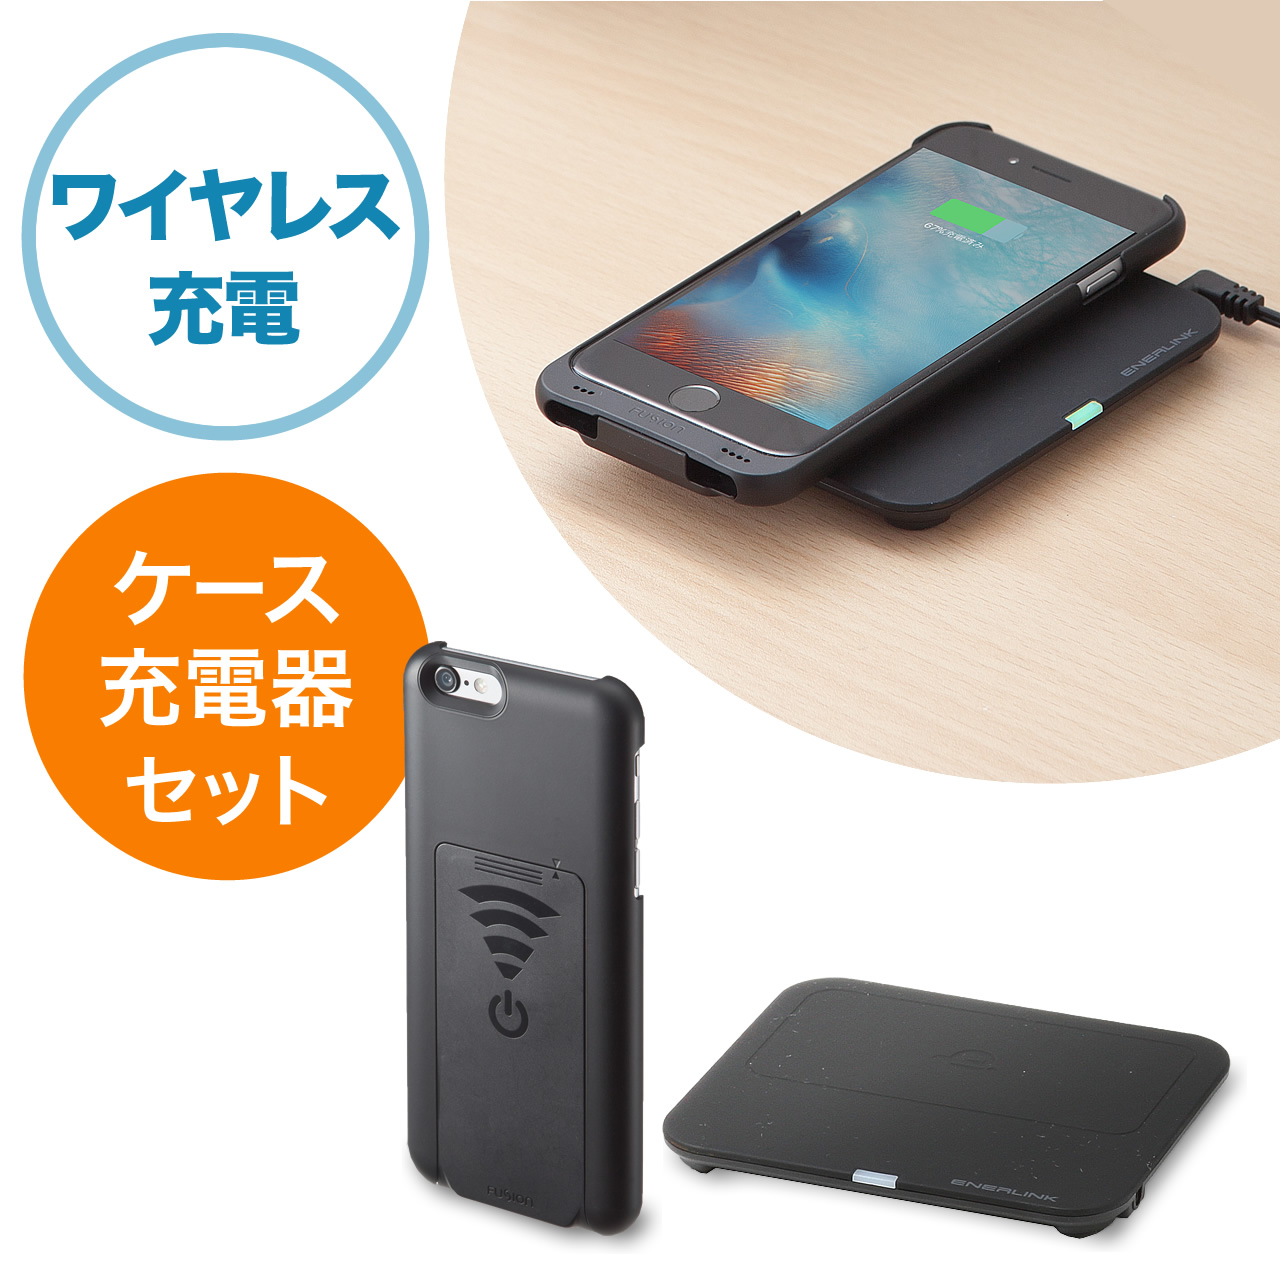 iPhone 6s/6 ワイヤレス充電ケース（Qiケース）/充電パッドセット WIR